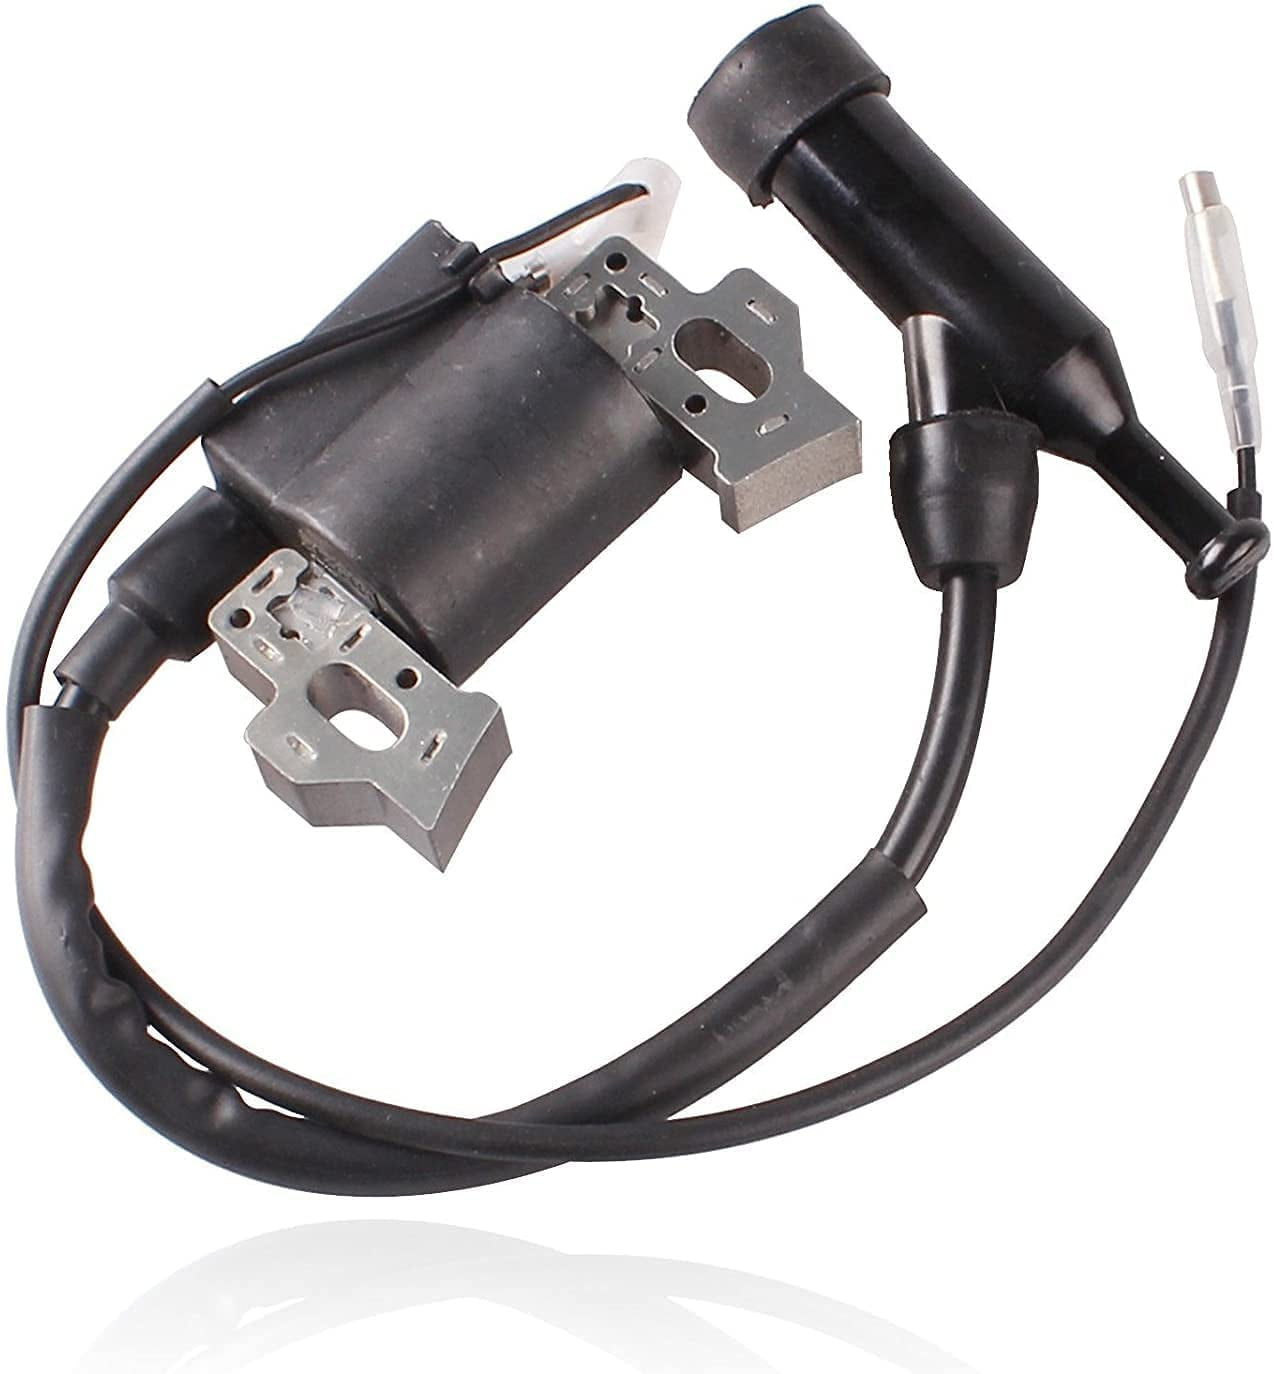 Ignition Coil & Spark Plug for Powerstroke PS9C3501 2500 3500 Generator 